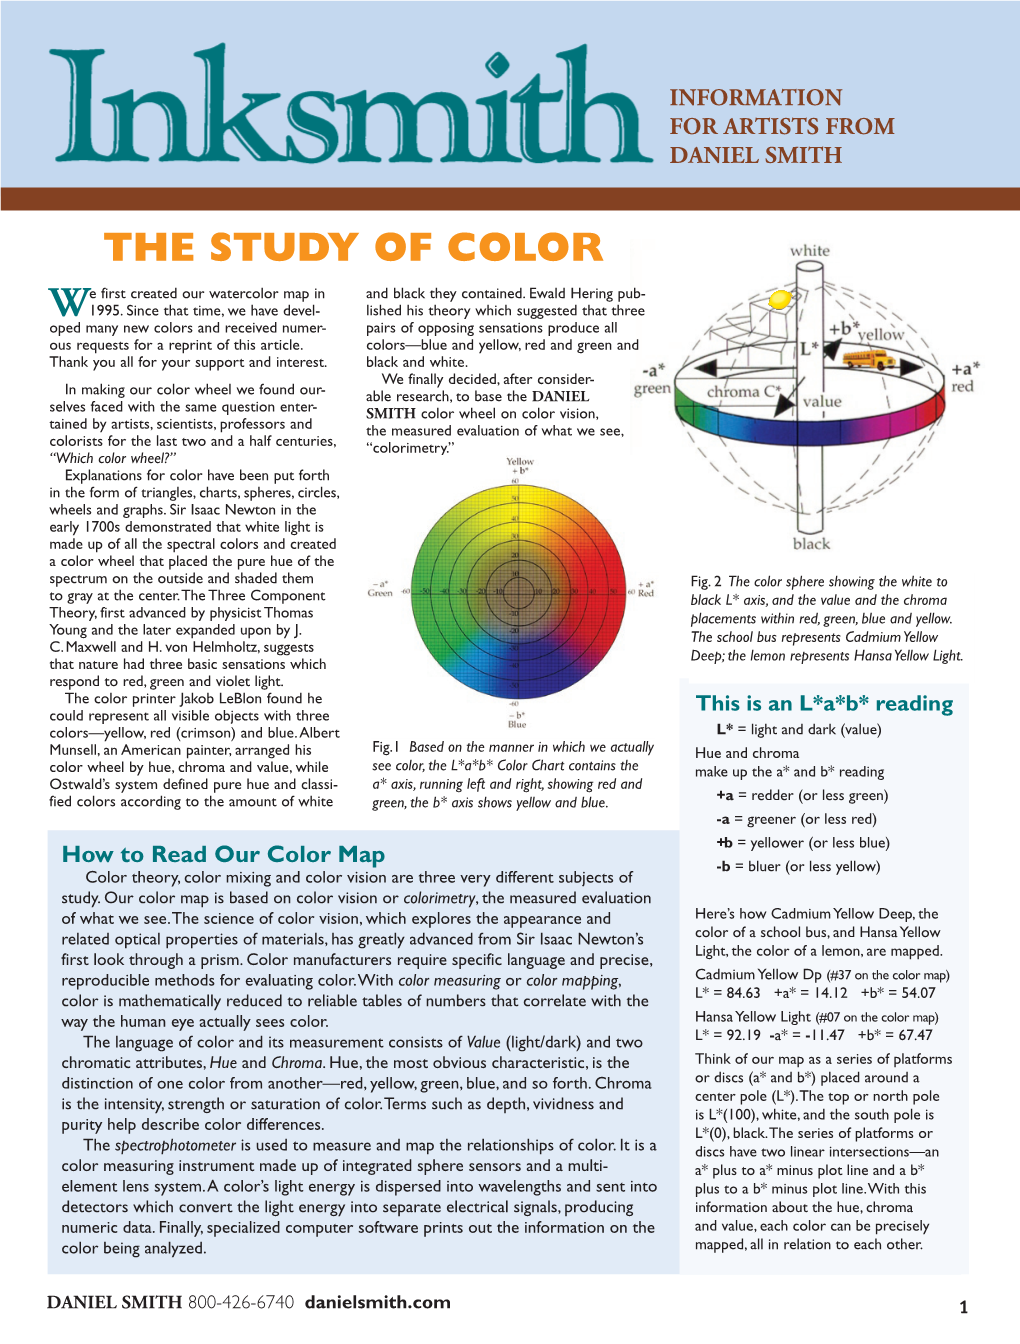 The Study of Color